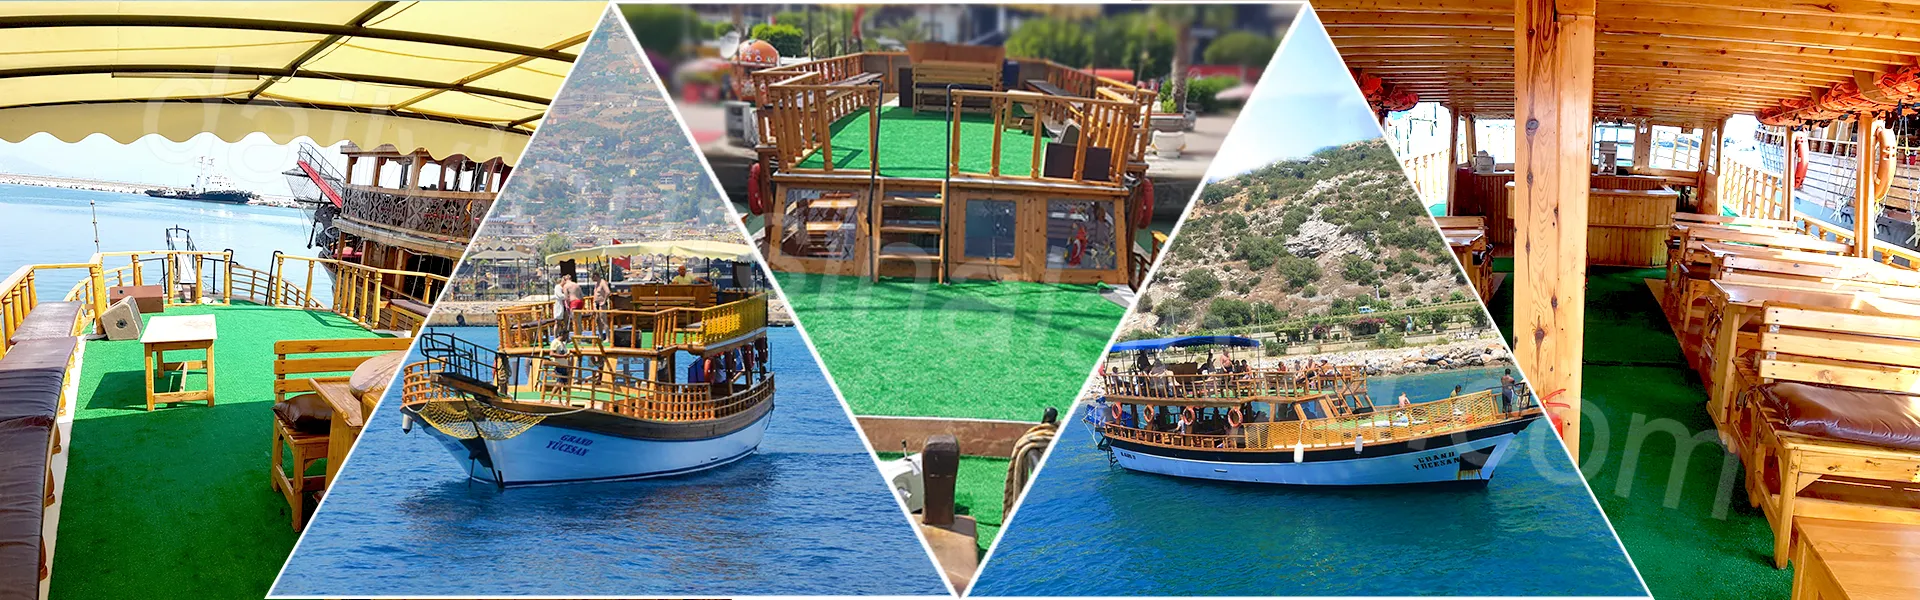 Alanya Tranquil Boat Tour